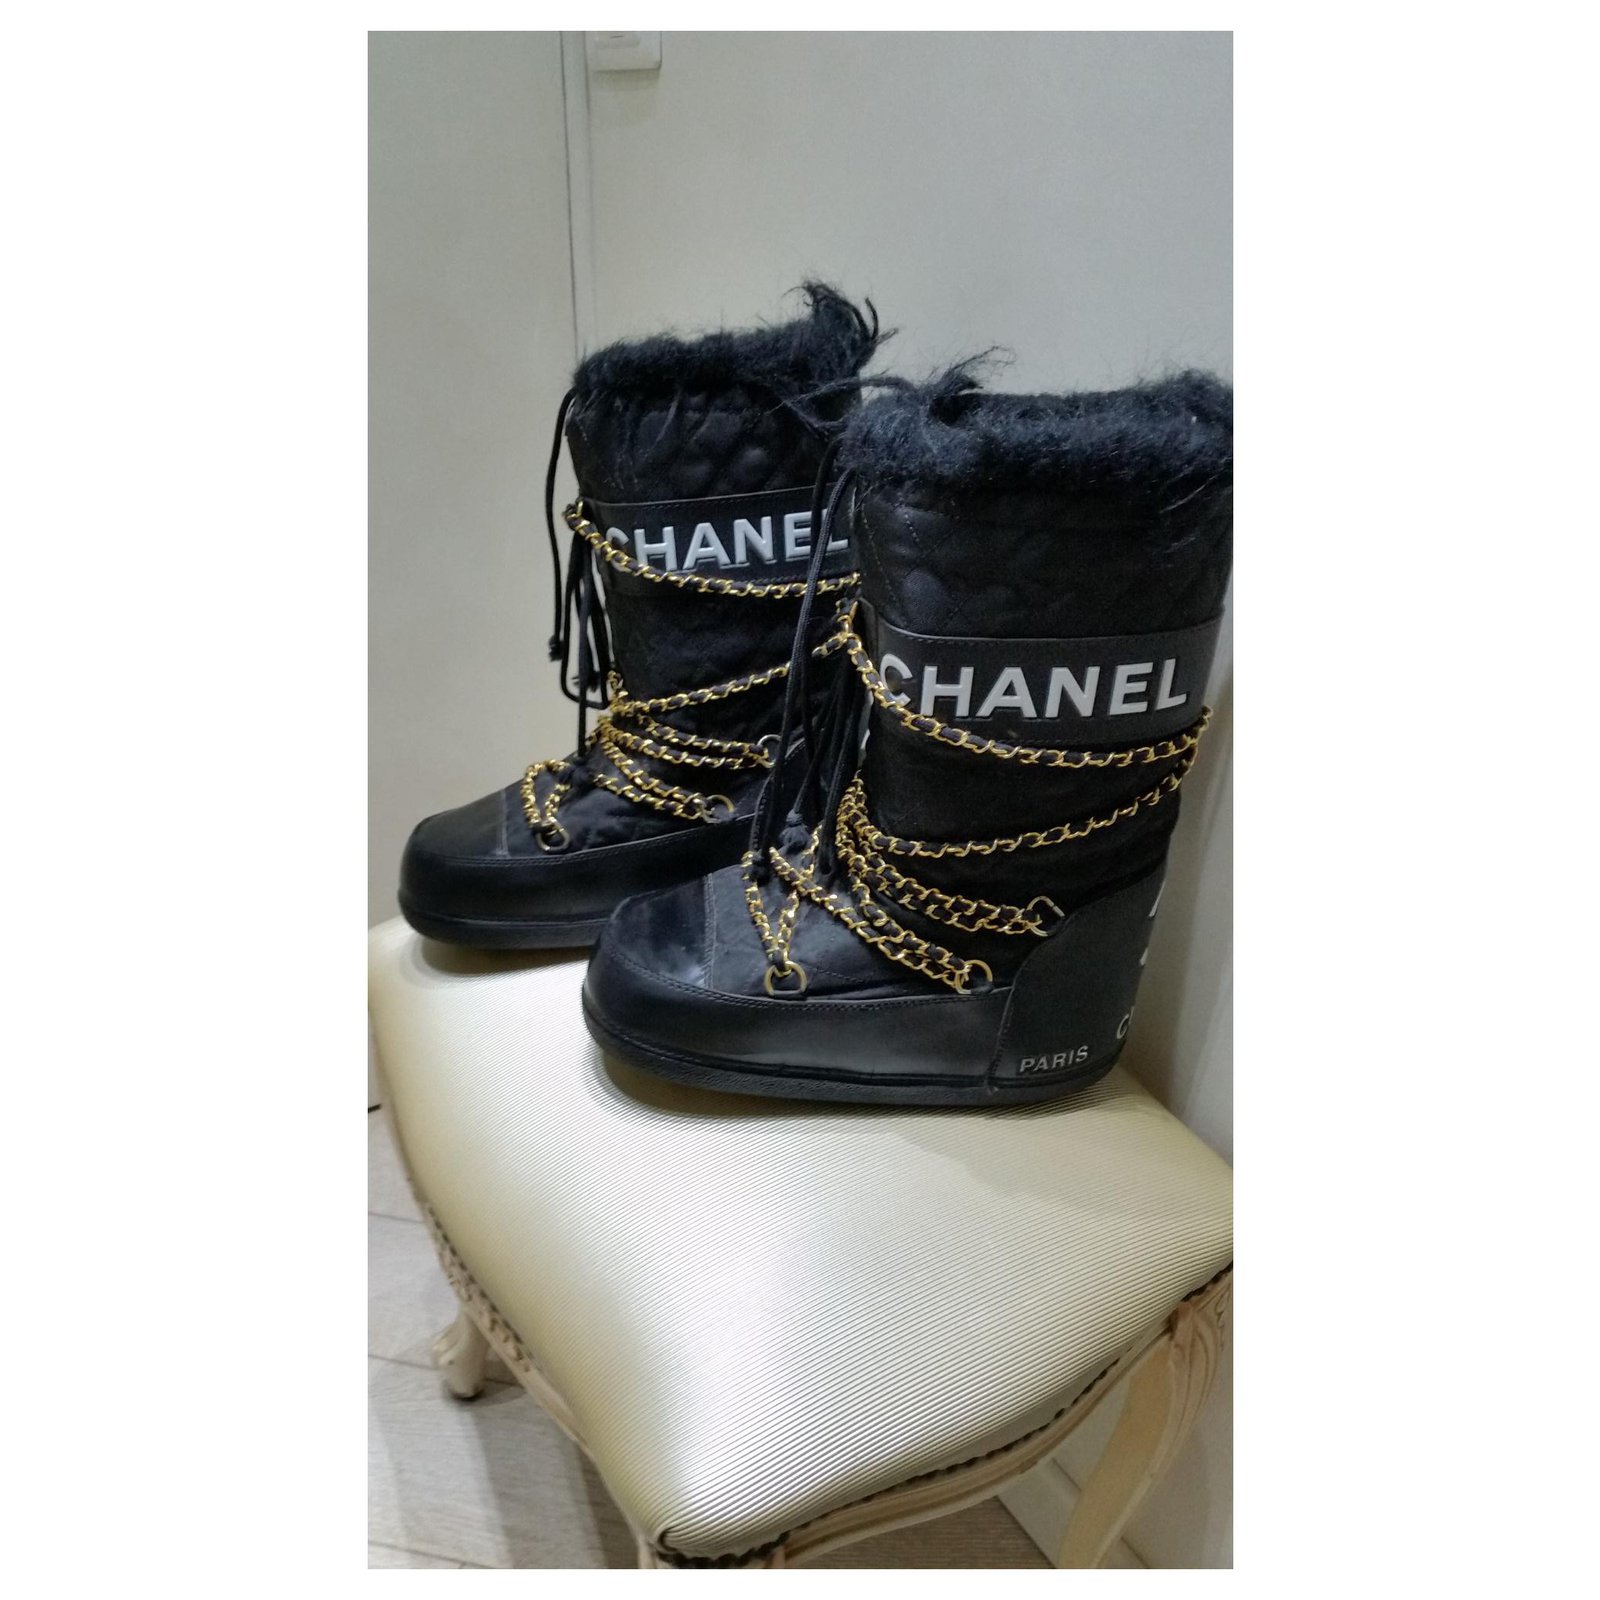 Chanel Moon Boots Sweden, SAVE 52% 